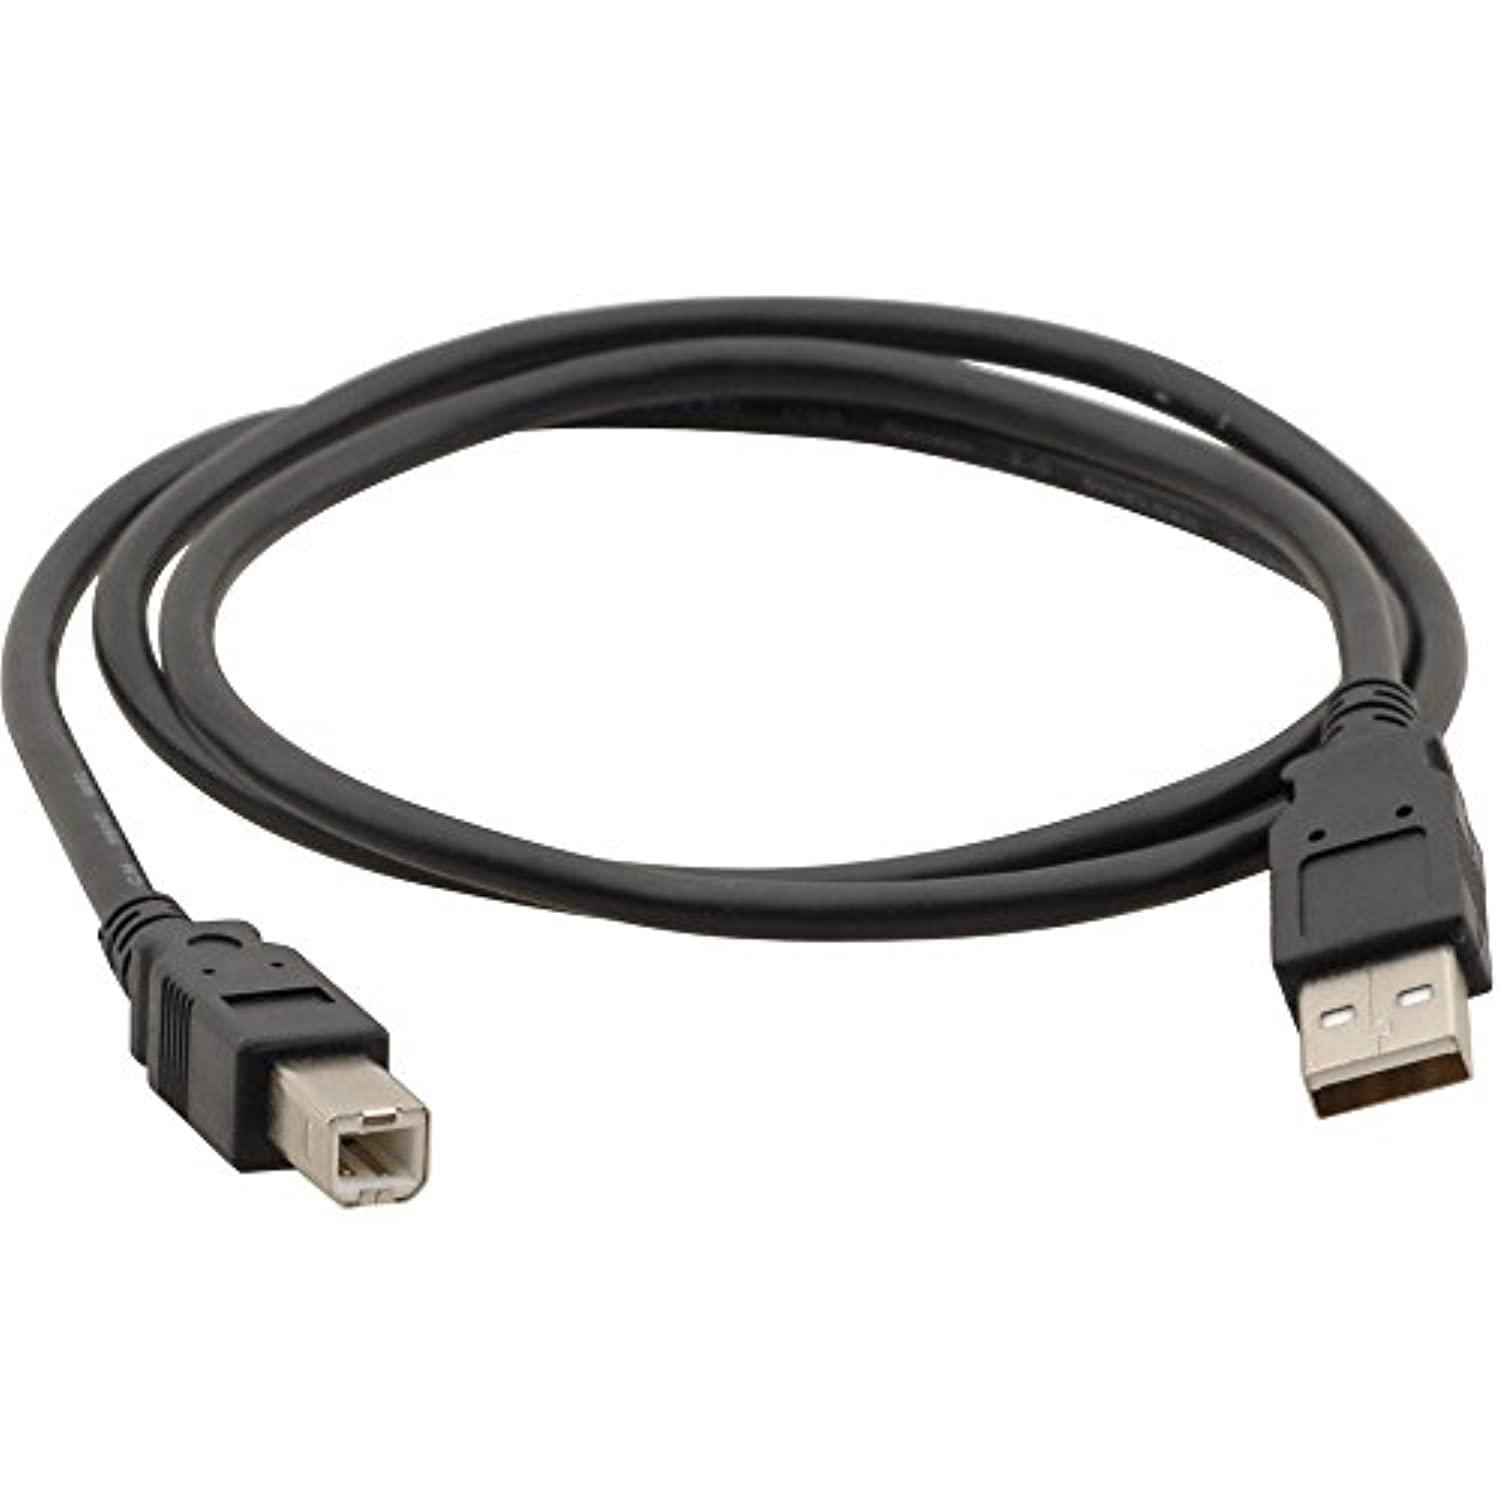 readywired usb cable cord for akai professional mpd218, mpd226, mpd232 drum pad controller